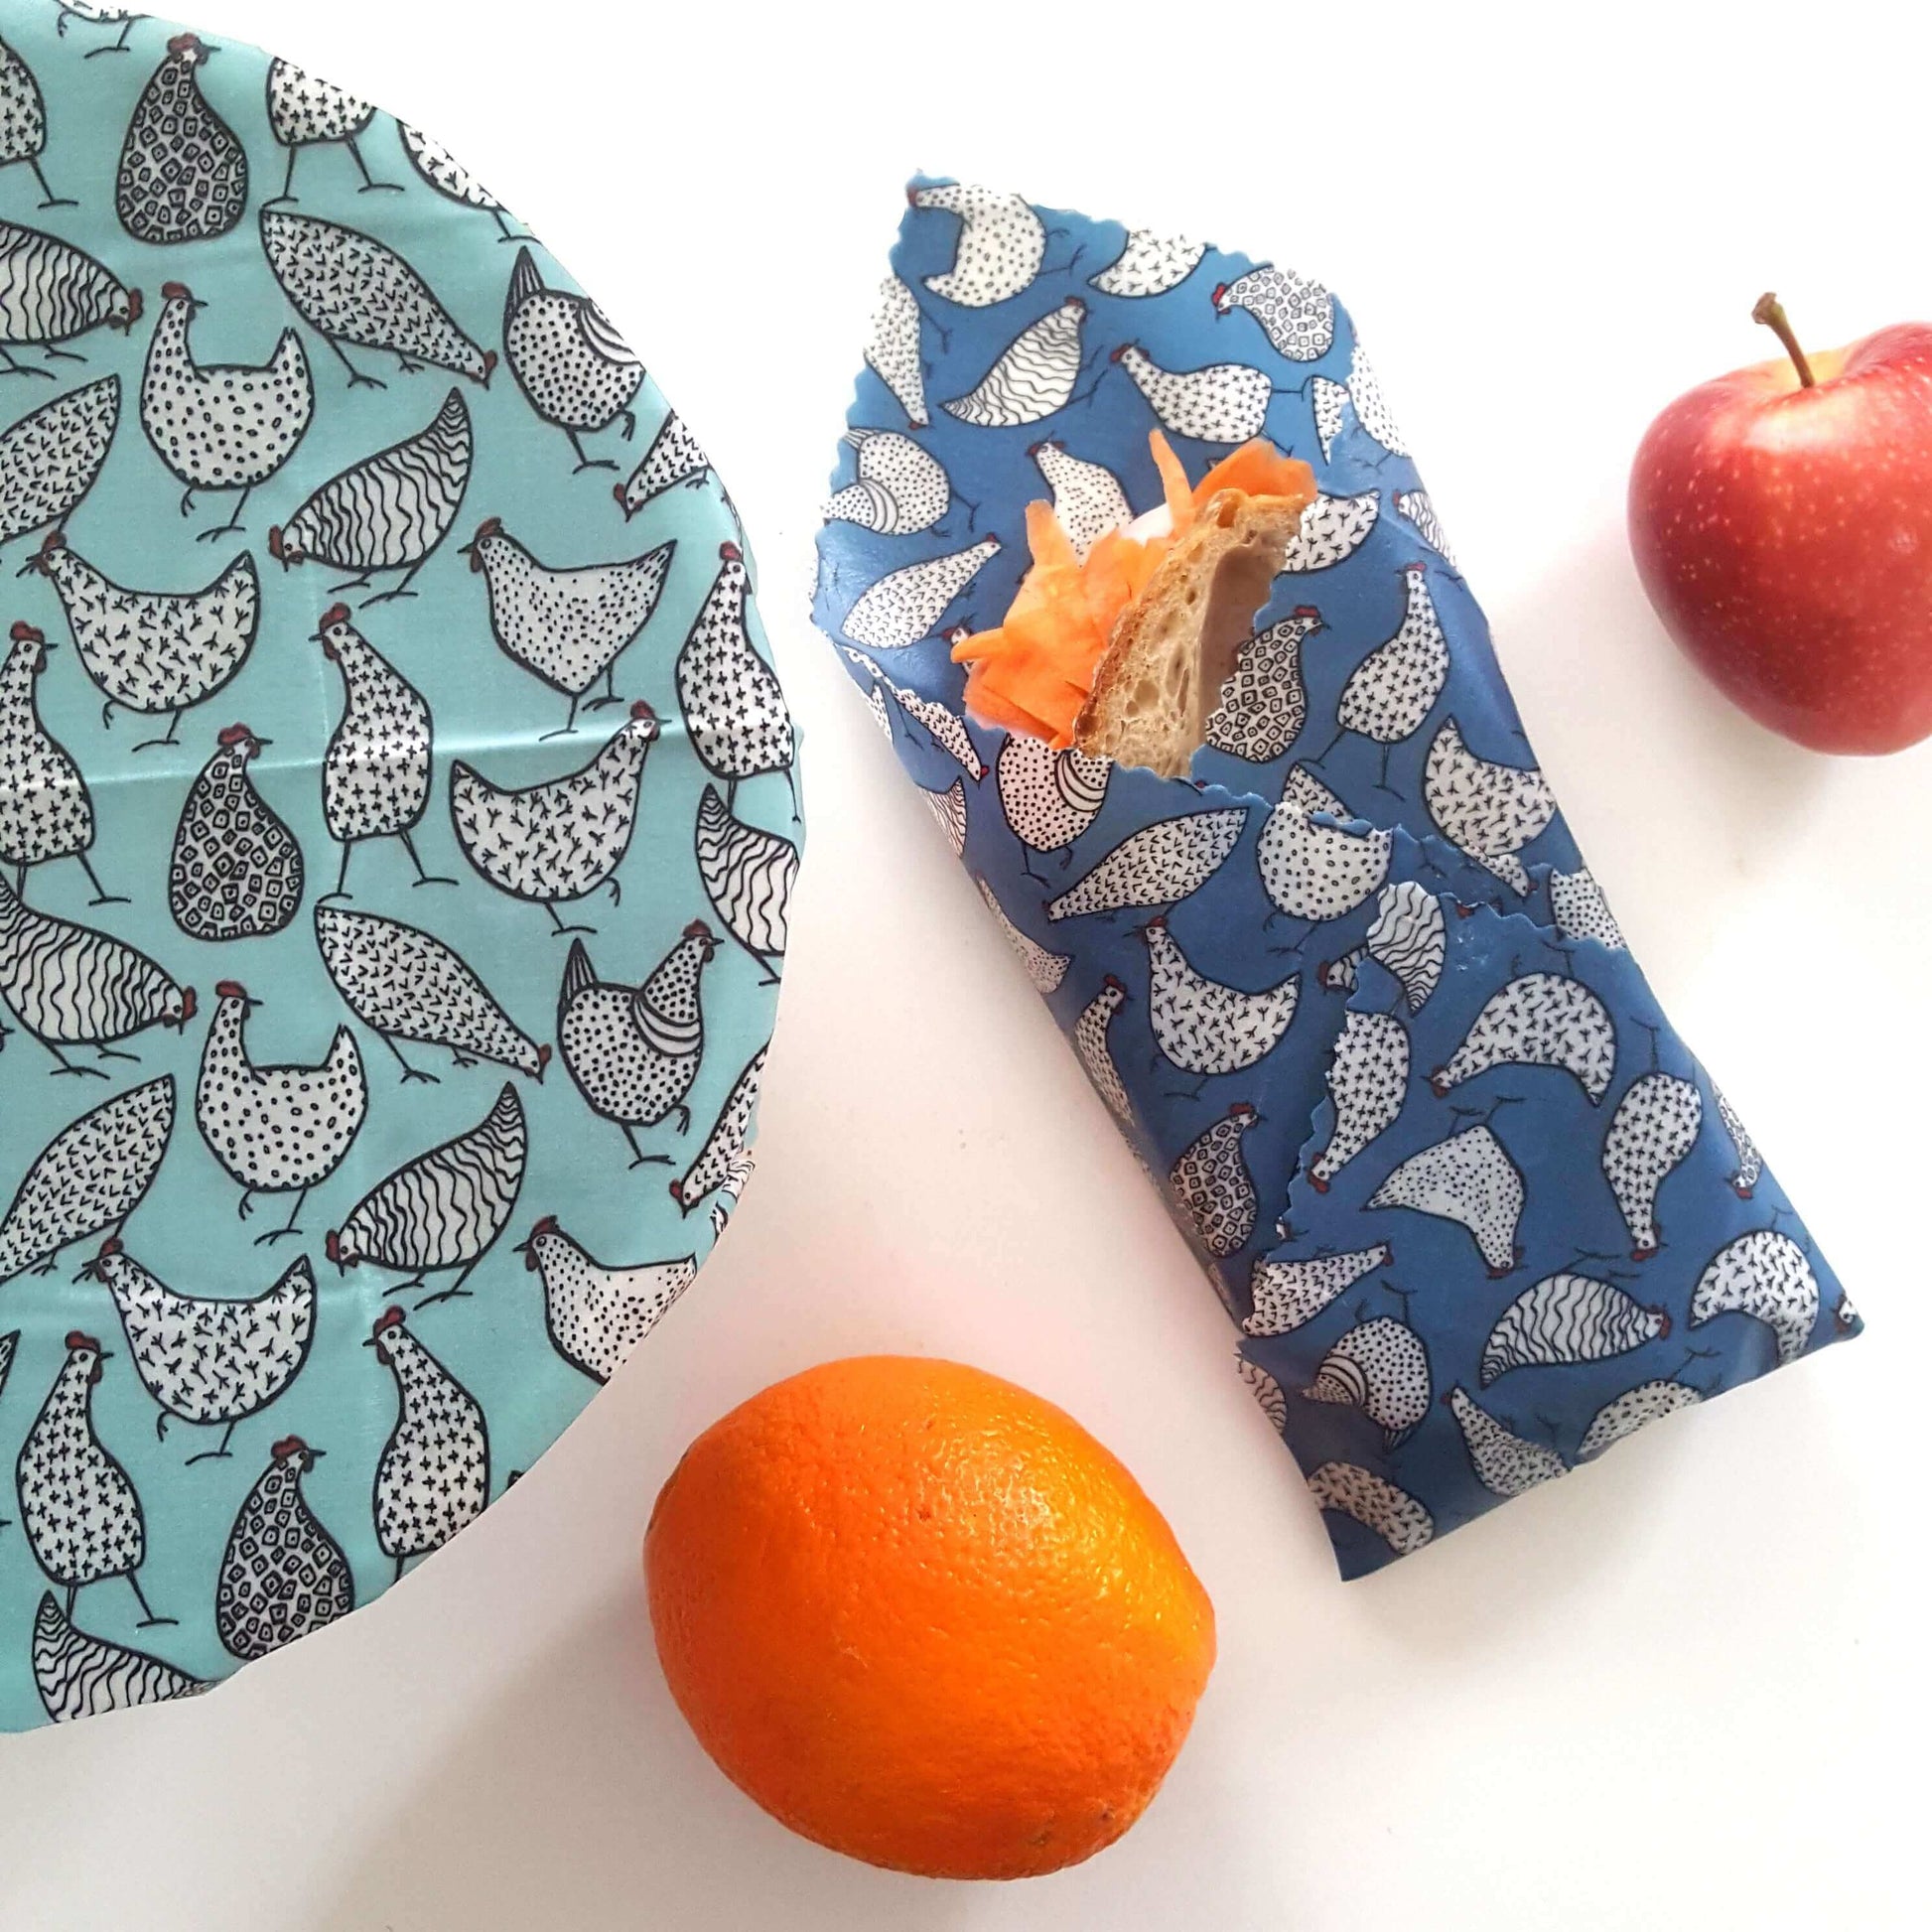 Chicken Run Earth Kind Sandwich & Bowl Set of 2 Large Beeswax Wraps